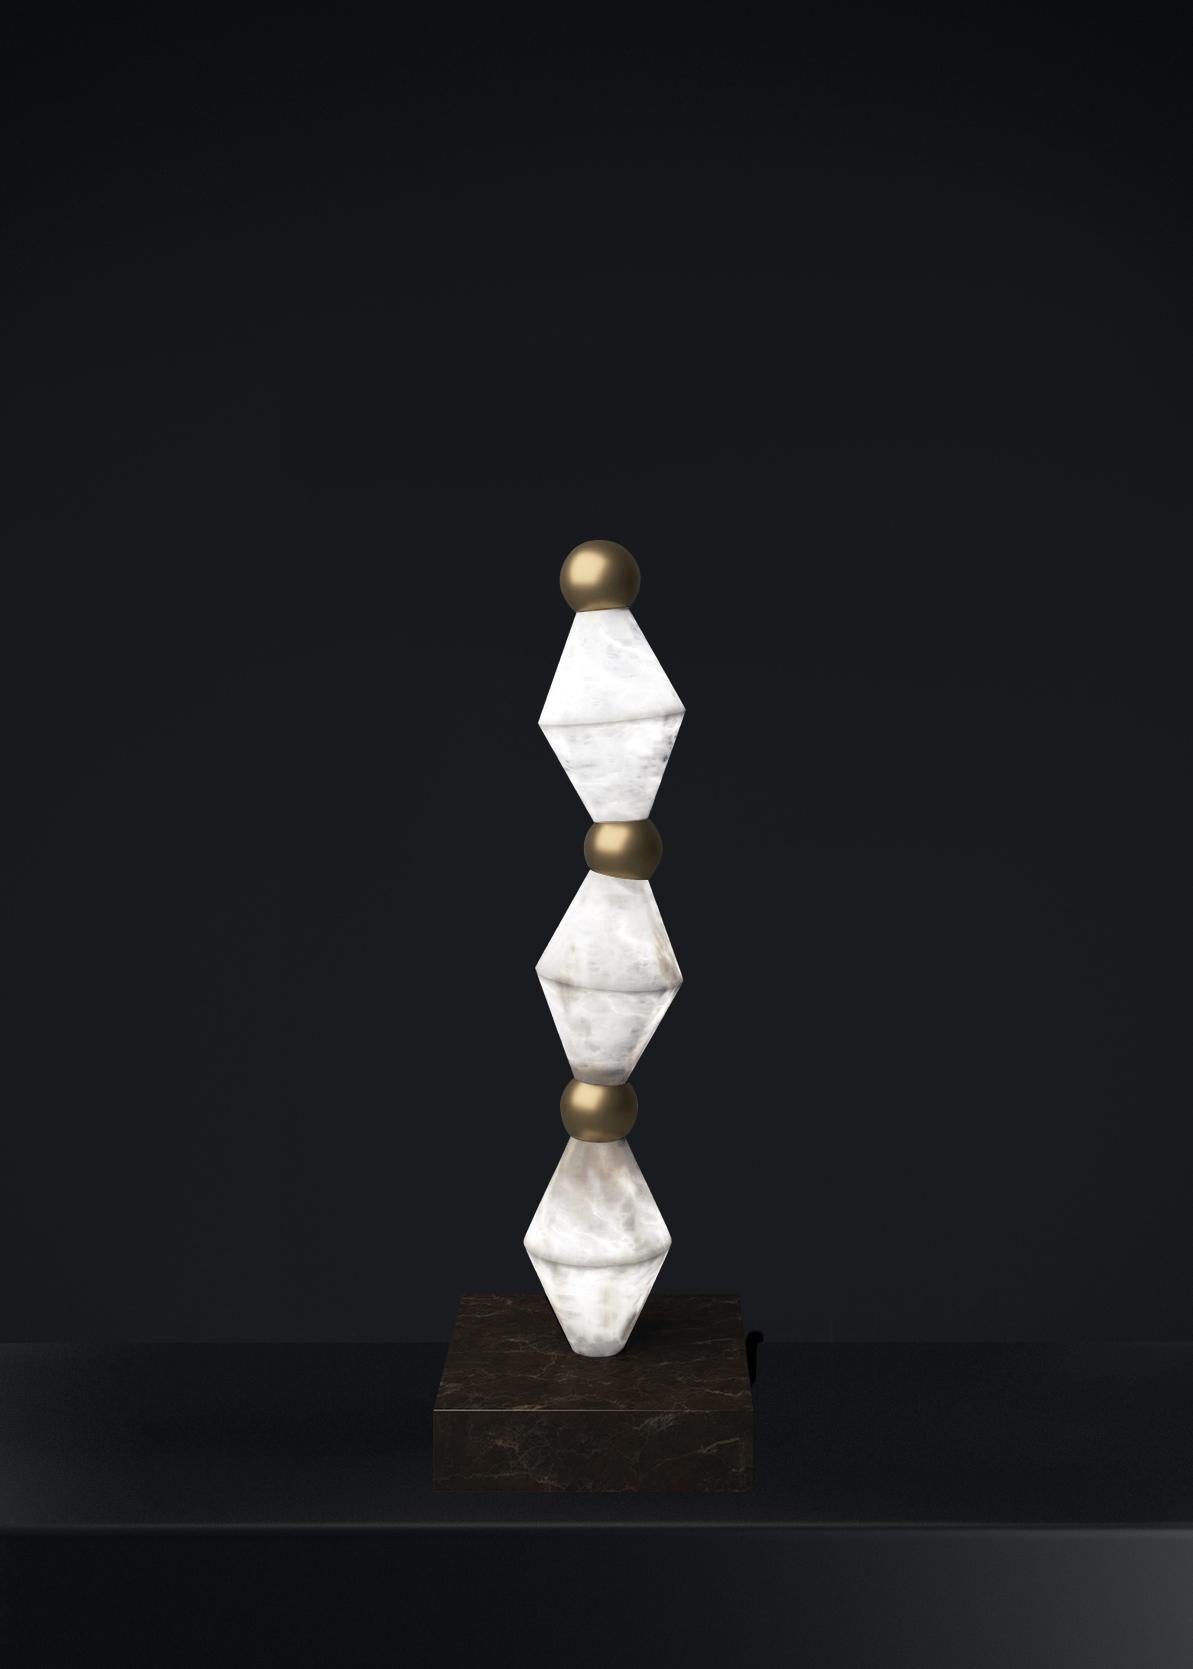 Chronos Bronze Table Lamp by Alabastro Italiano
Dimensions: D 15 x W 15 x H 71,5 cm.
Materials: White alabaster, marble and bronze.

Available in different finishes: Shiny Silver, Bronze, Brushed Brass, Ruggine of Florence, Brushed Burnished, Shiny